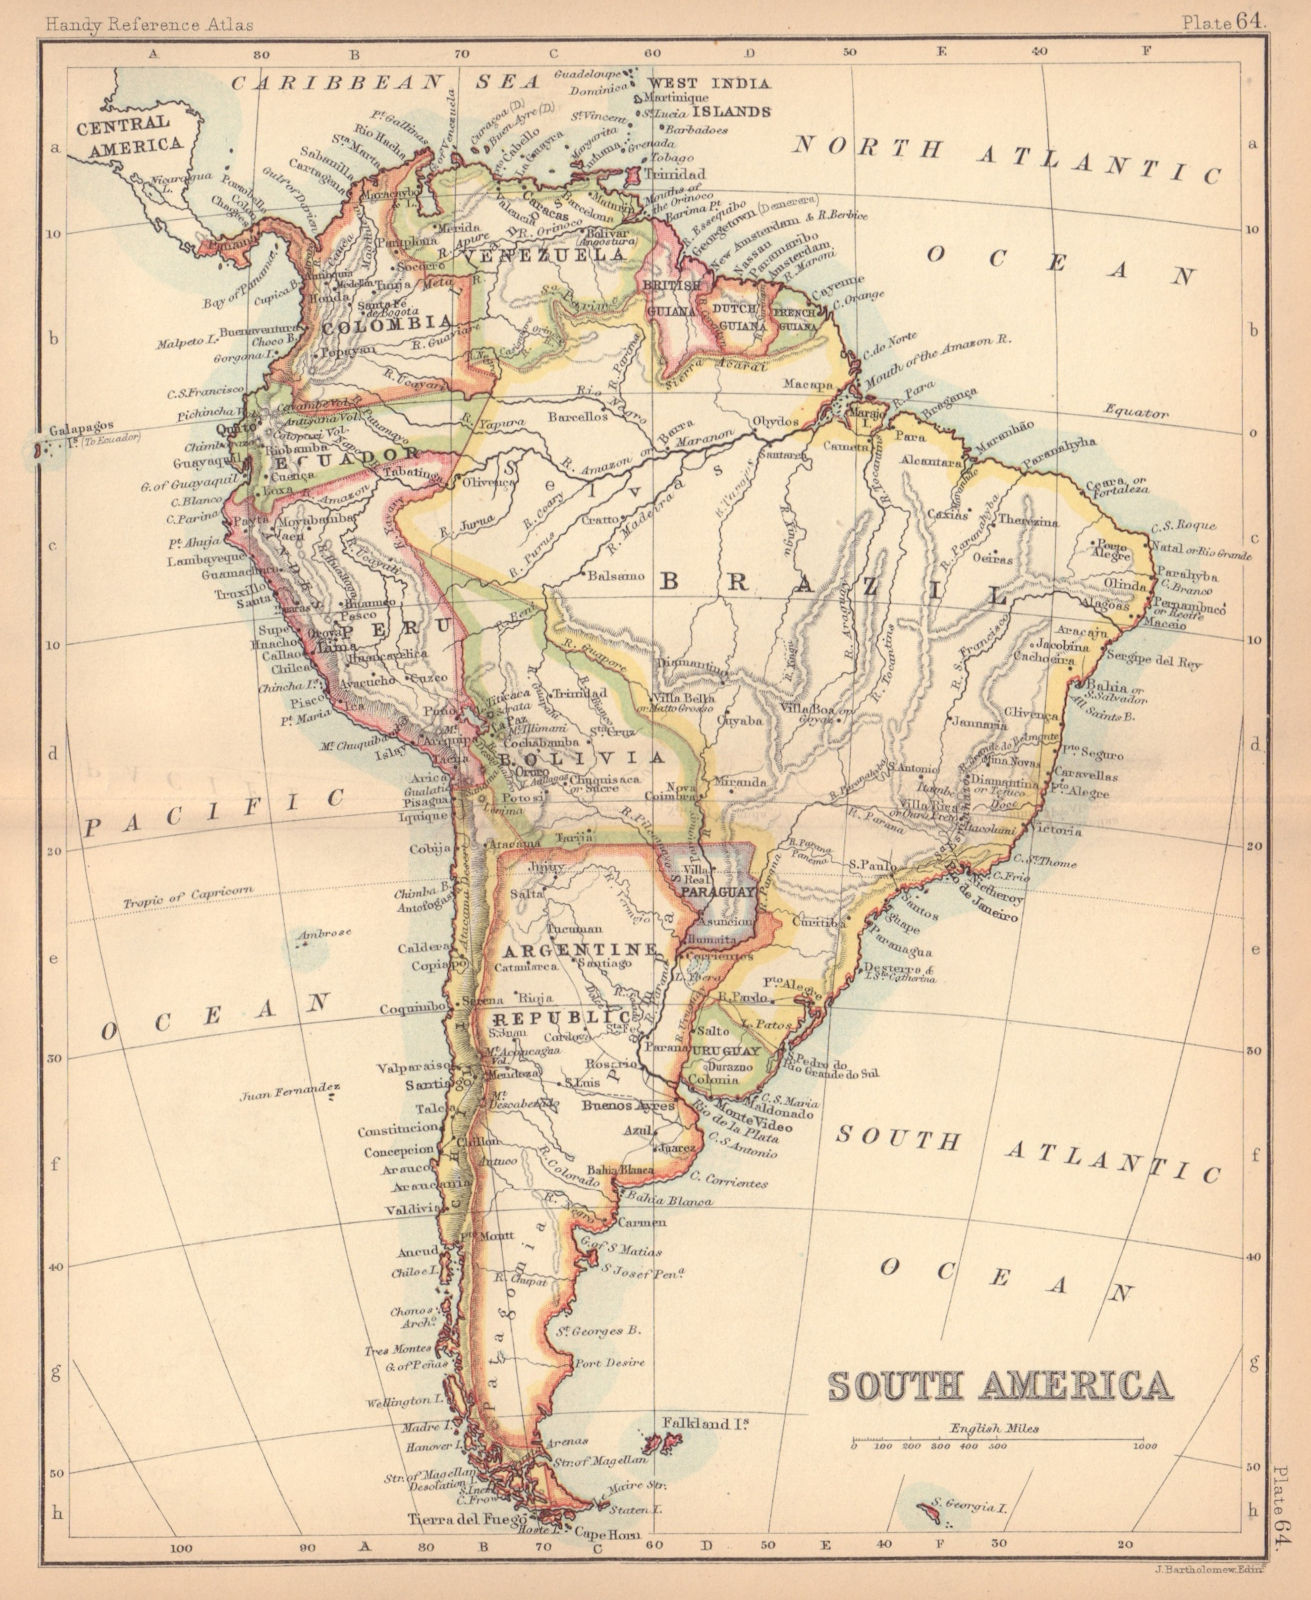 Associate Product South America political. BARTHOLOMEW 1888 old antique vintage map plan chart